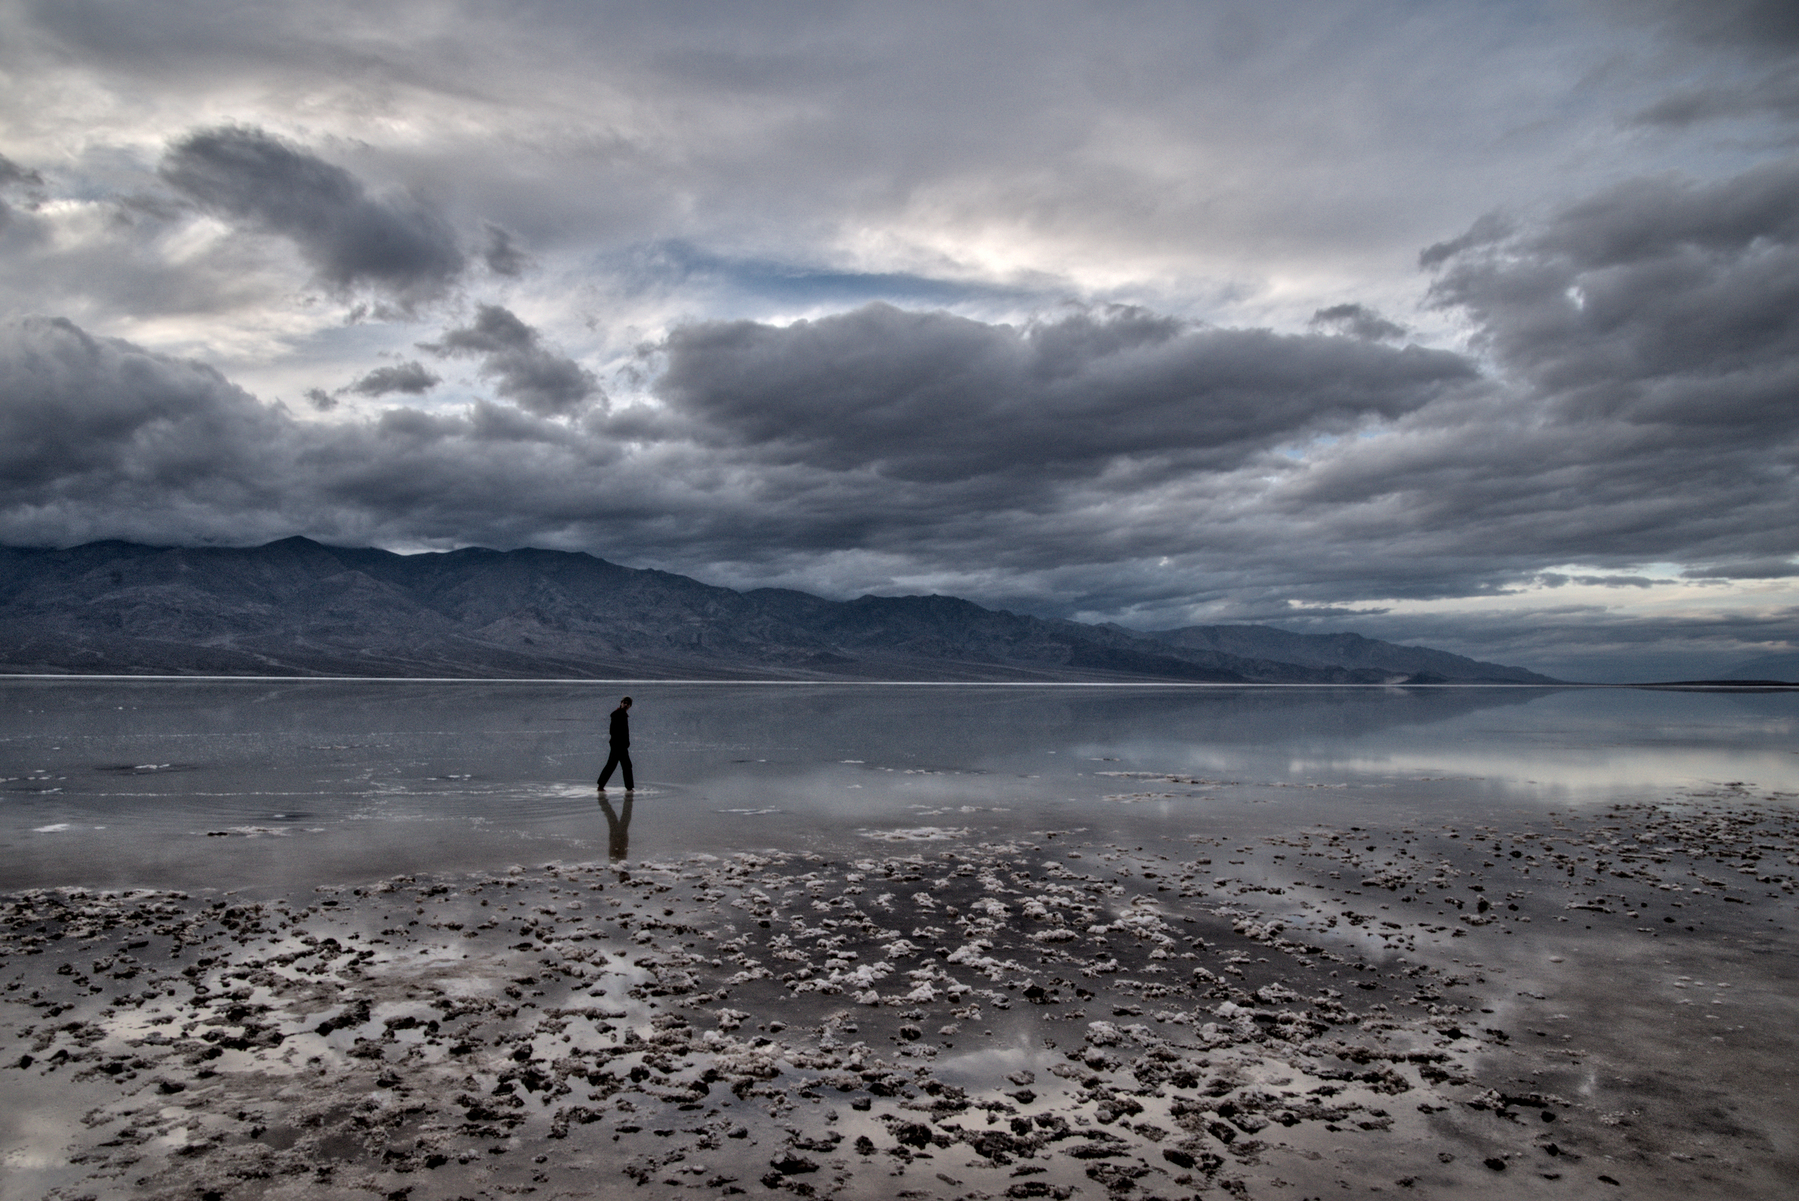 A man walks through the shallows of a shallow, salty lake.  There shores are white salt, dusky mountains rise from the far shore.